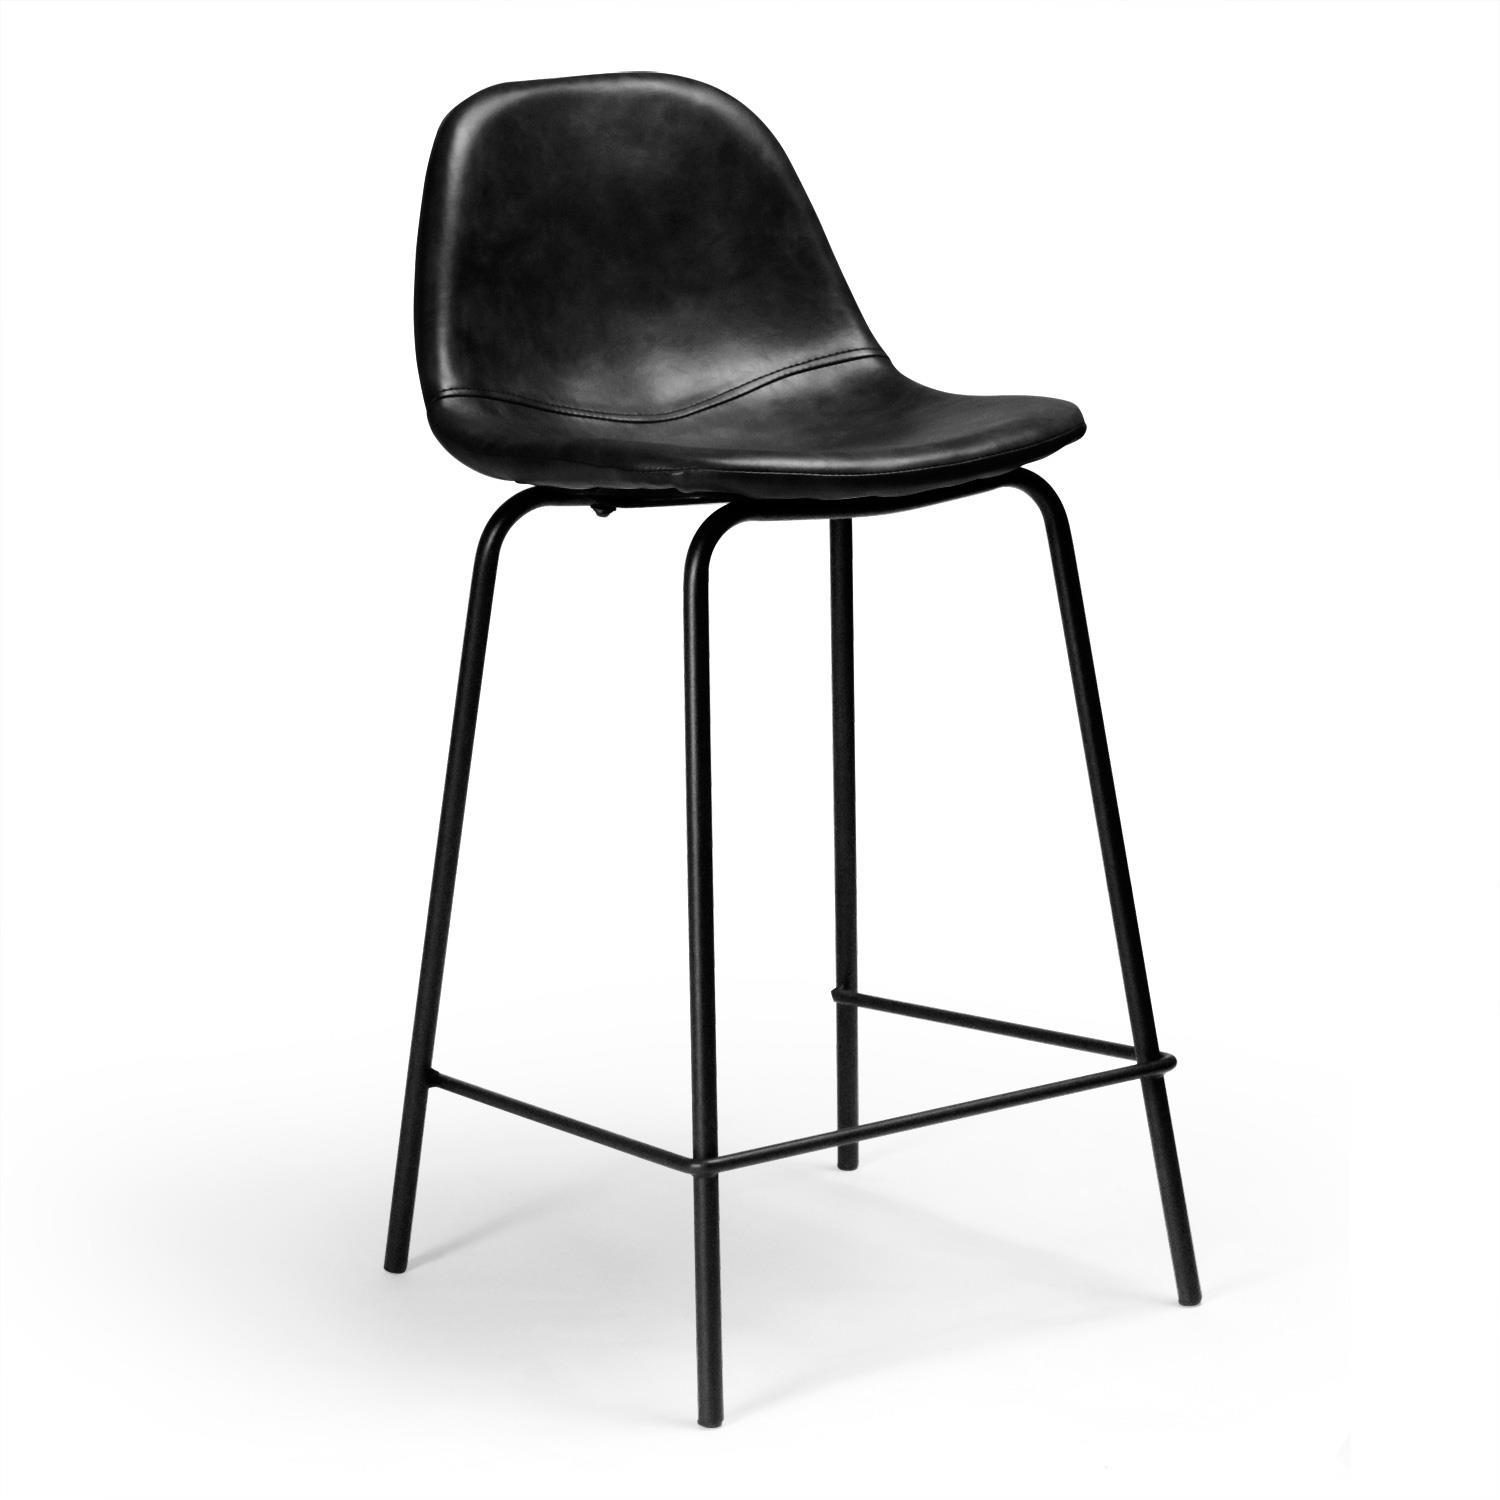 Aeon Furniture Maxine Set Of 2 Bar Stool In Charcoal AE9013-Counter-Charcoal